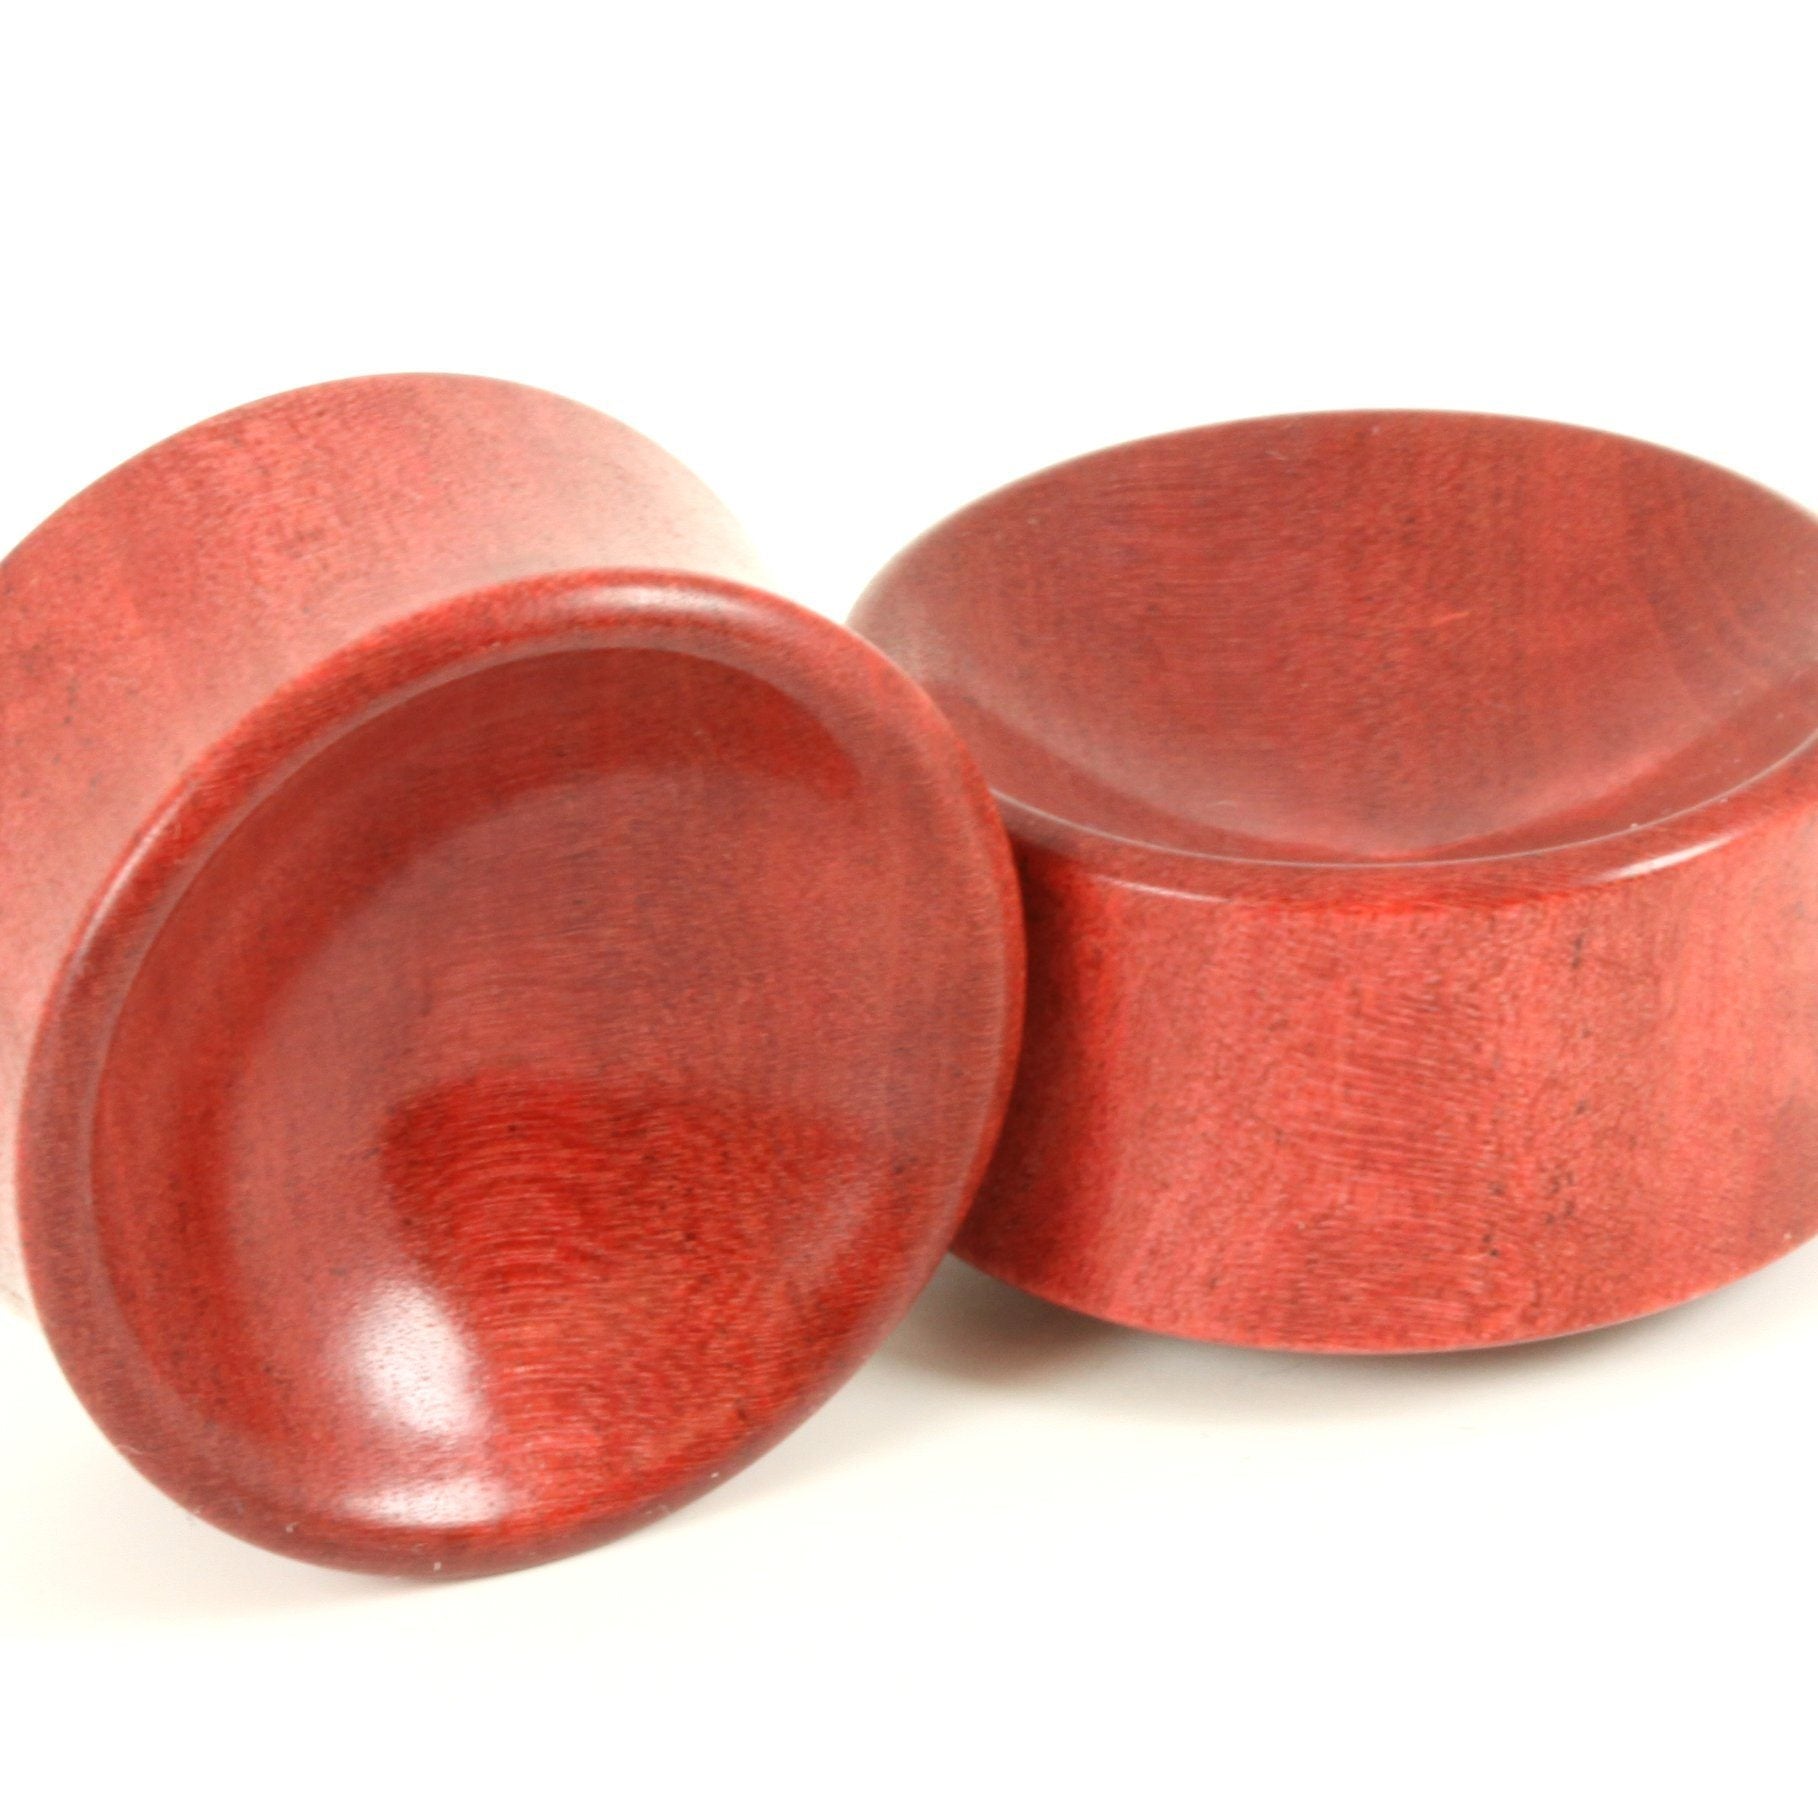 Pink Ivory Bowl Plugs, jewellery, body jewellery. - Southshore Adornments 